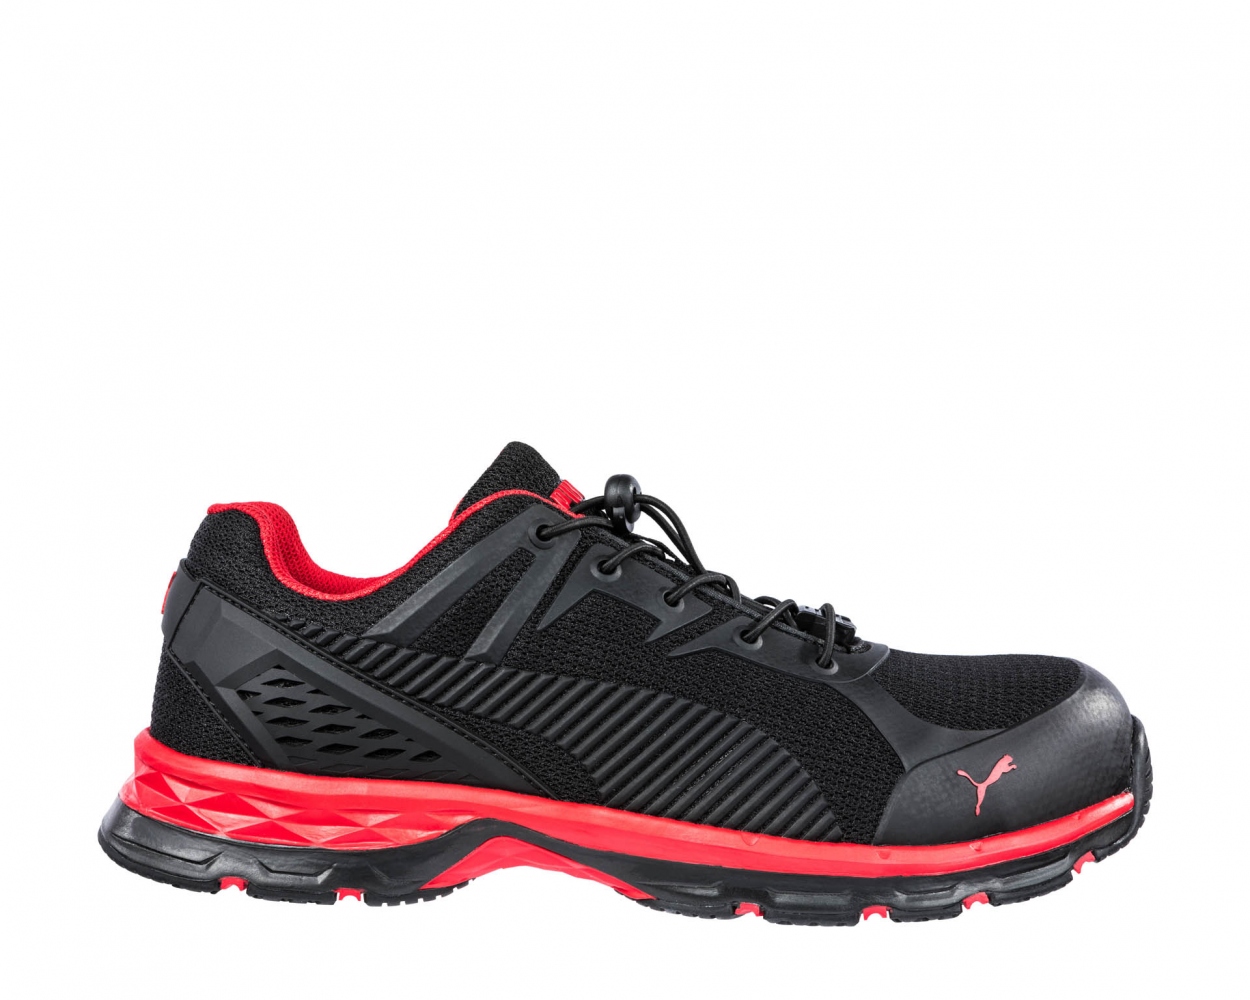 pics/Albatros/Safety Shoes/643890/puma-643890-fuse-motion-2-red-low-210-list.jpg